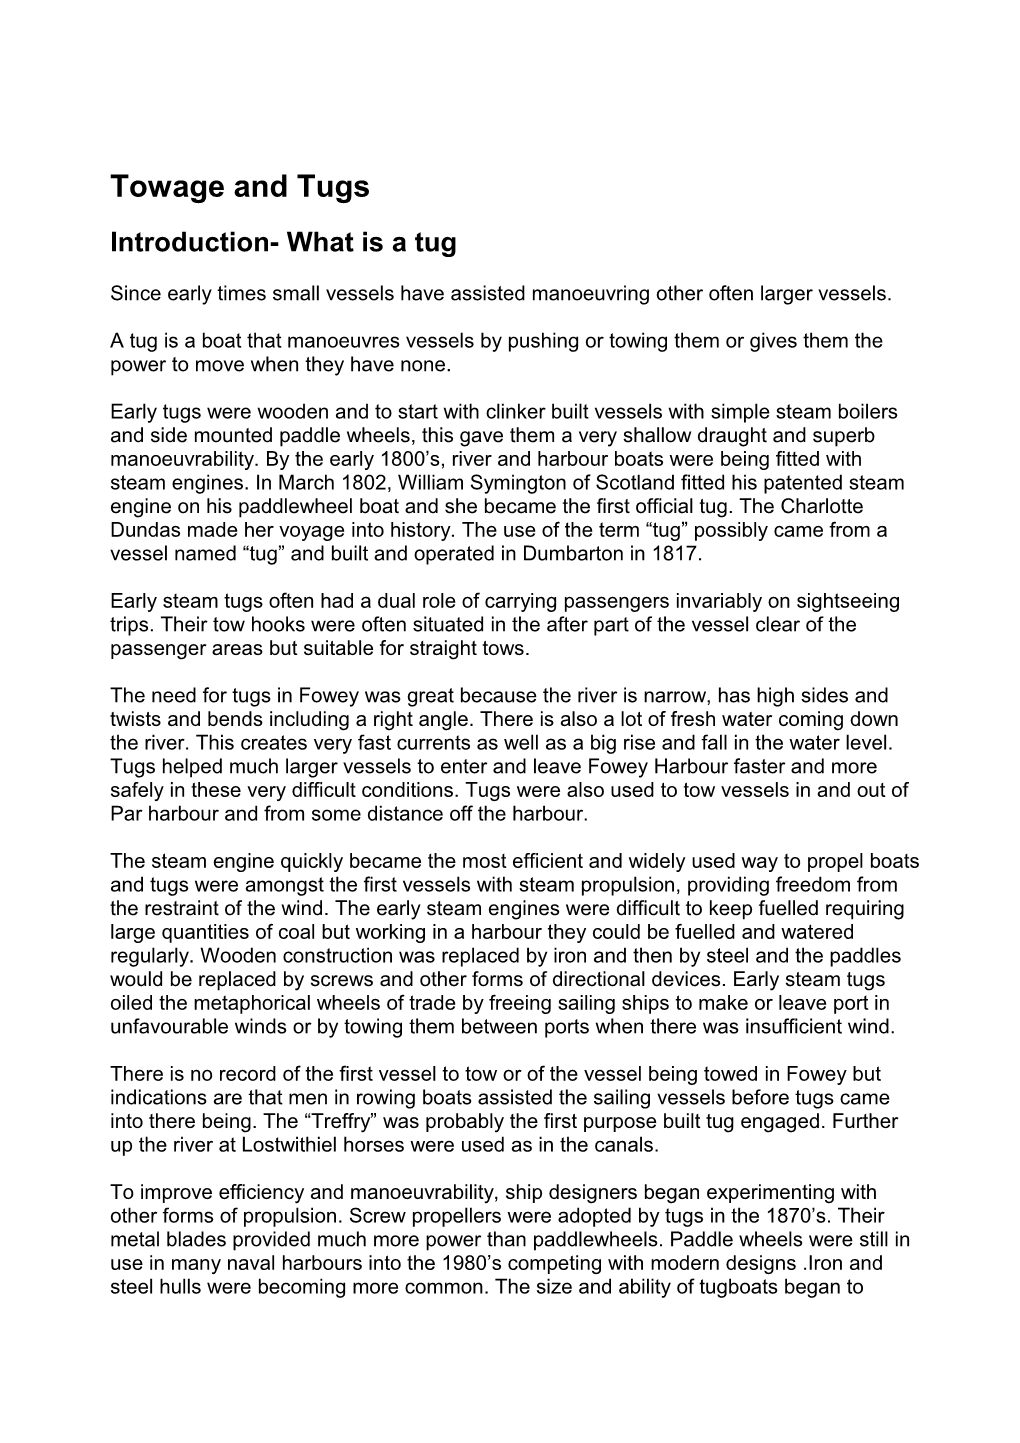 Introduction- What Is a Tug